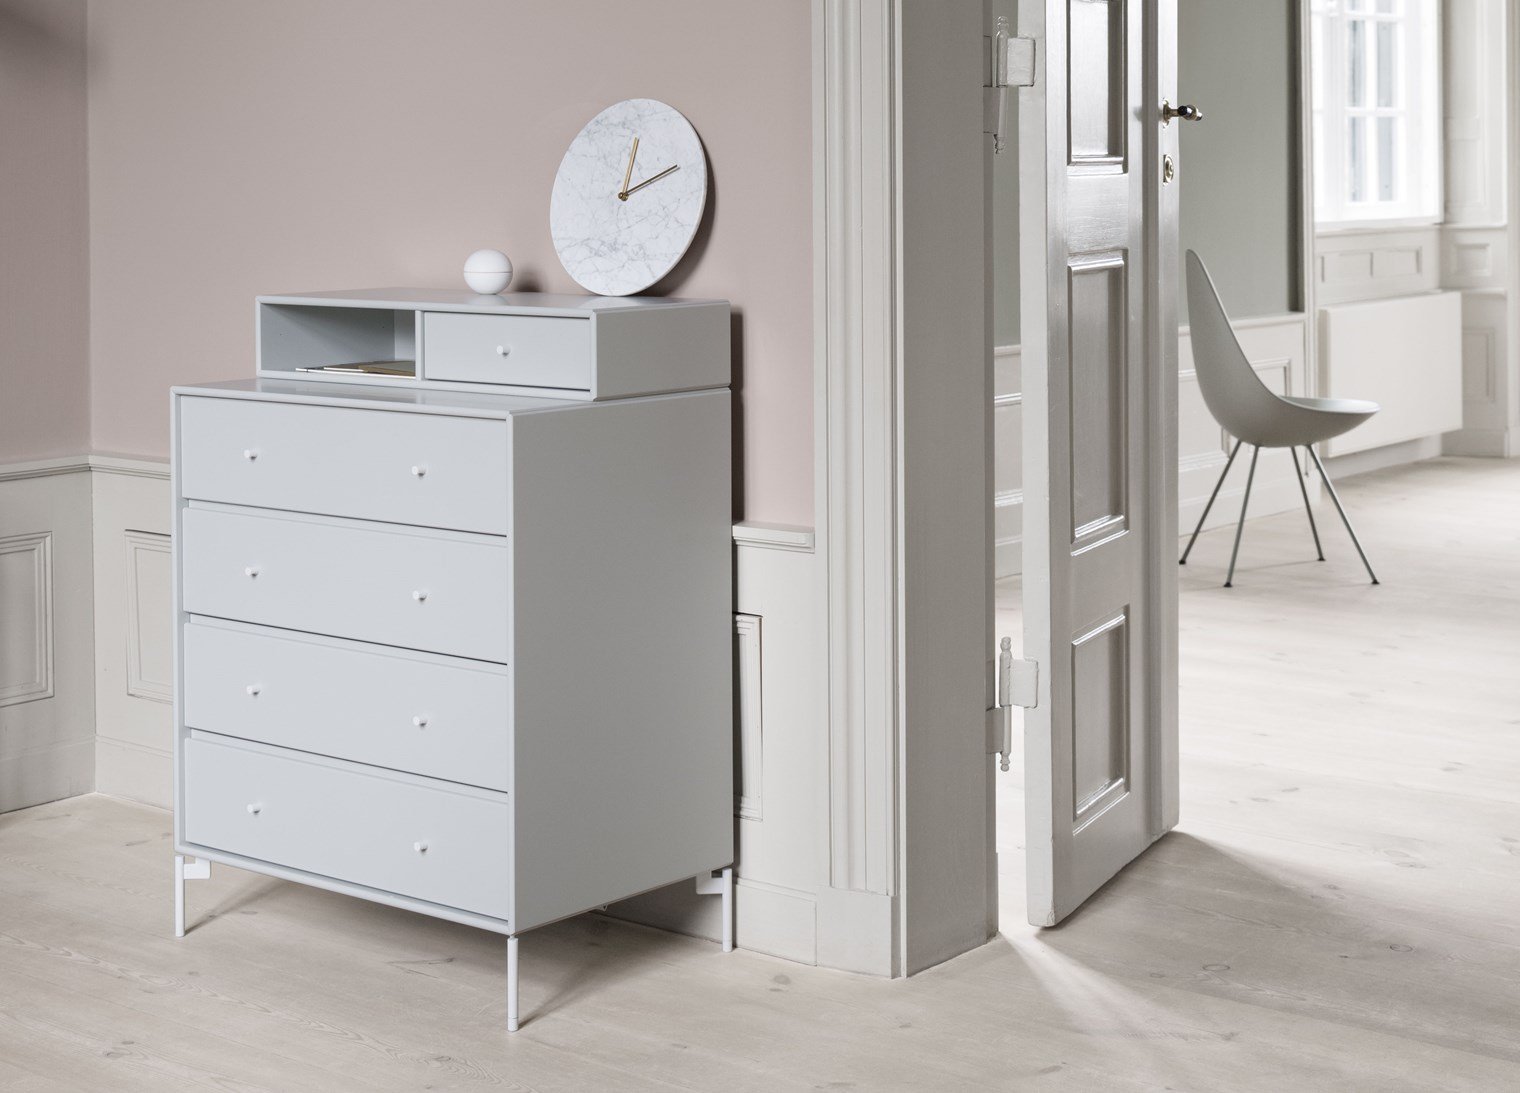 Montana Keep Chest Of Drawers With Legs, Fennel/Matt Chrome